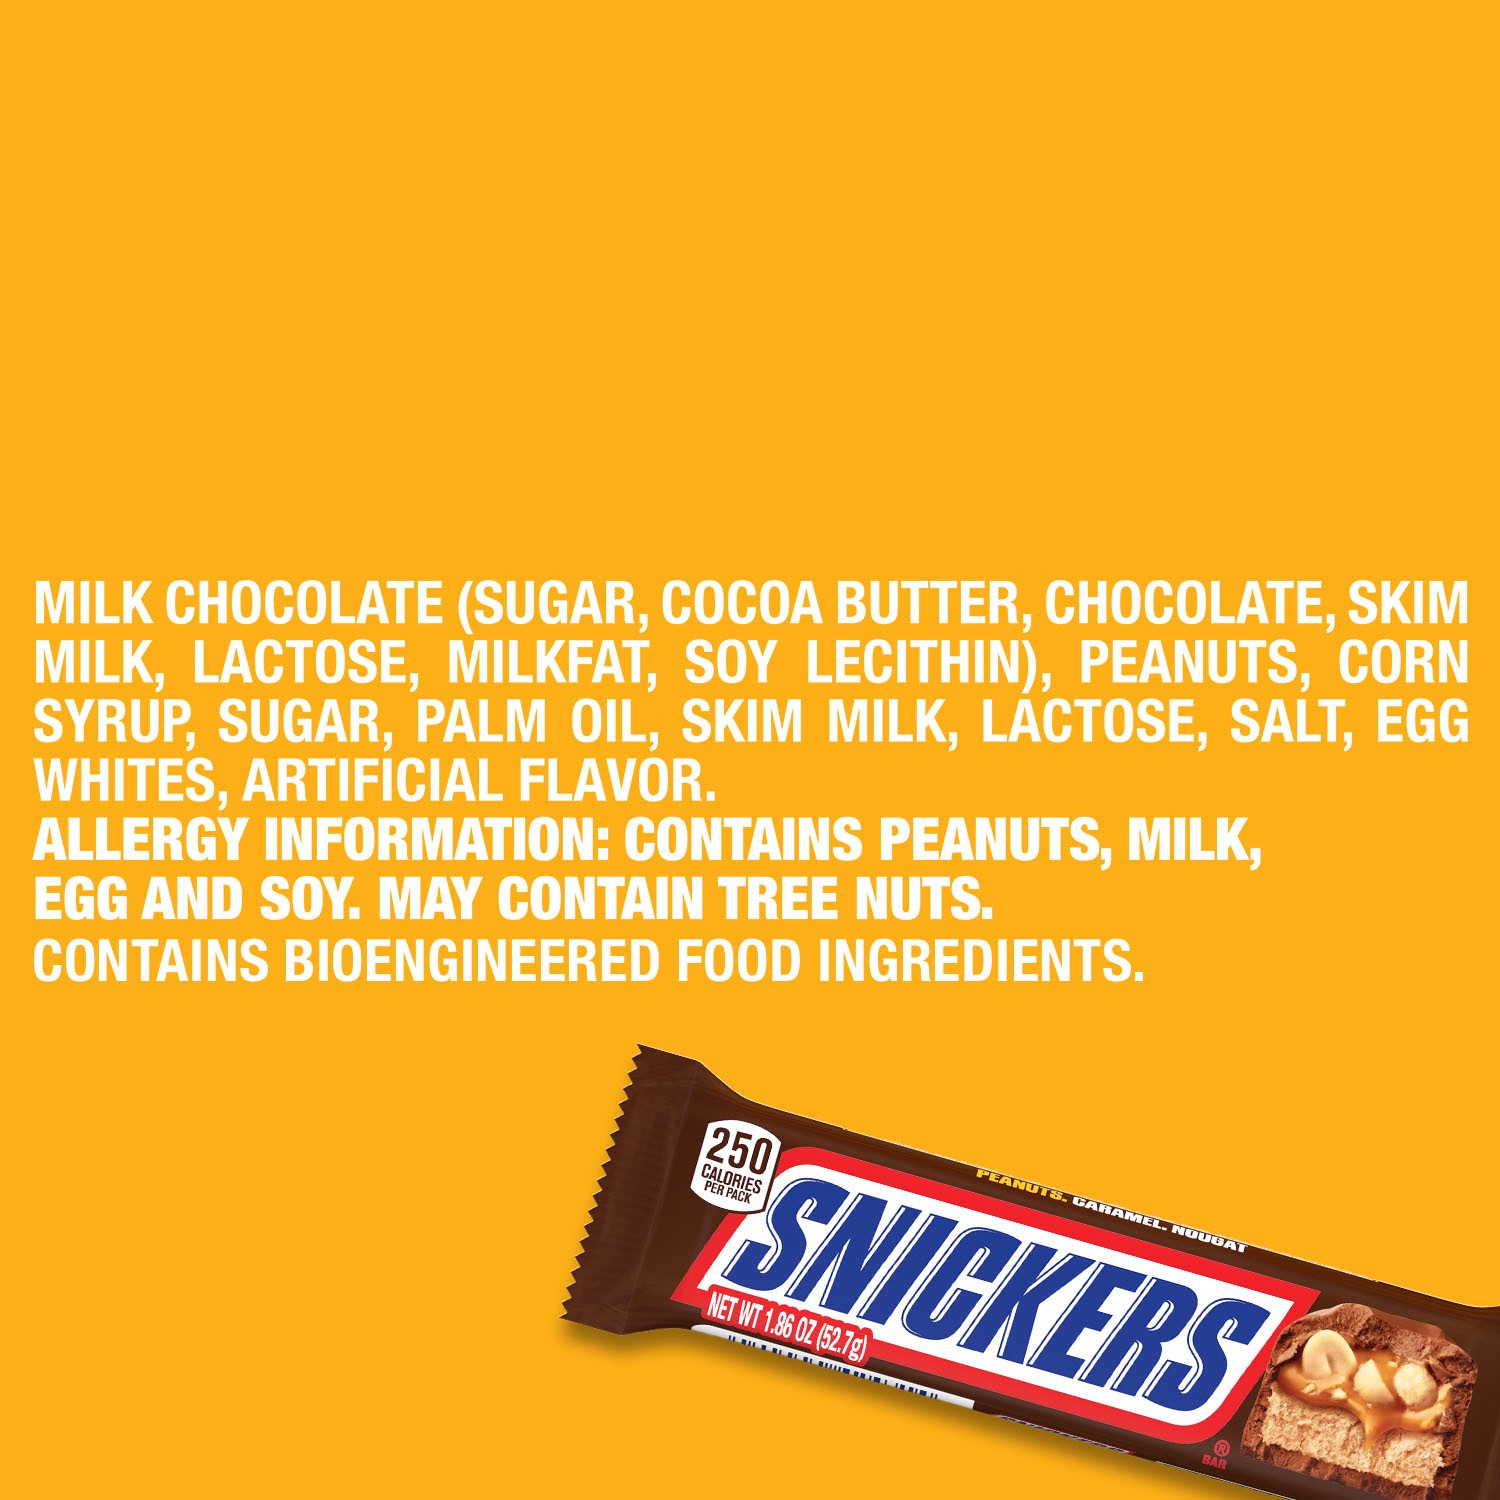 slide 5 of 8, SNICKERS Full Size Chocolate Candy Bar, 1.86 oz Bar, 1.86 oz